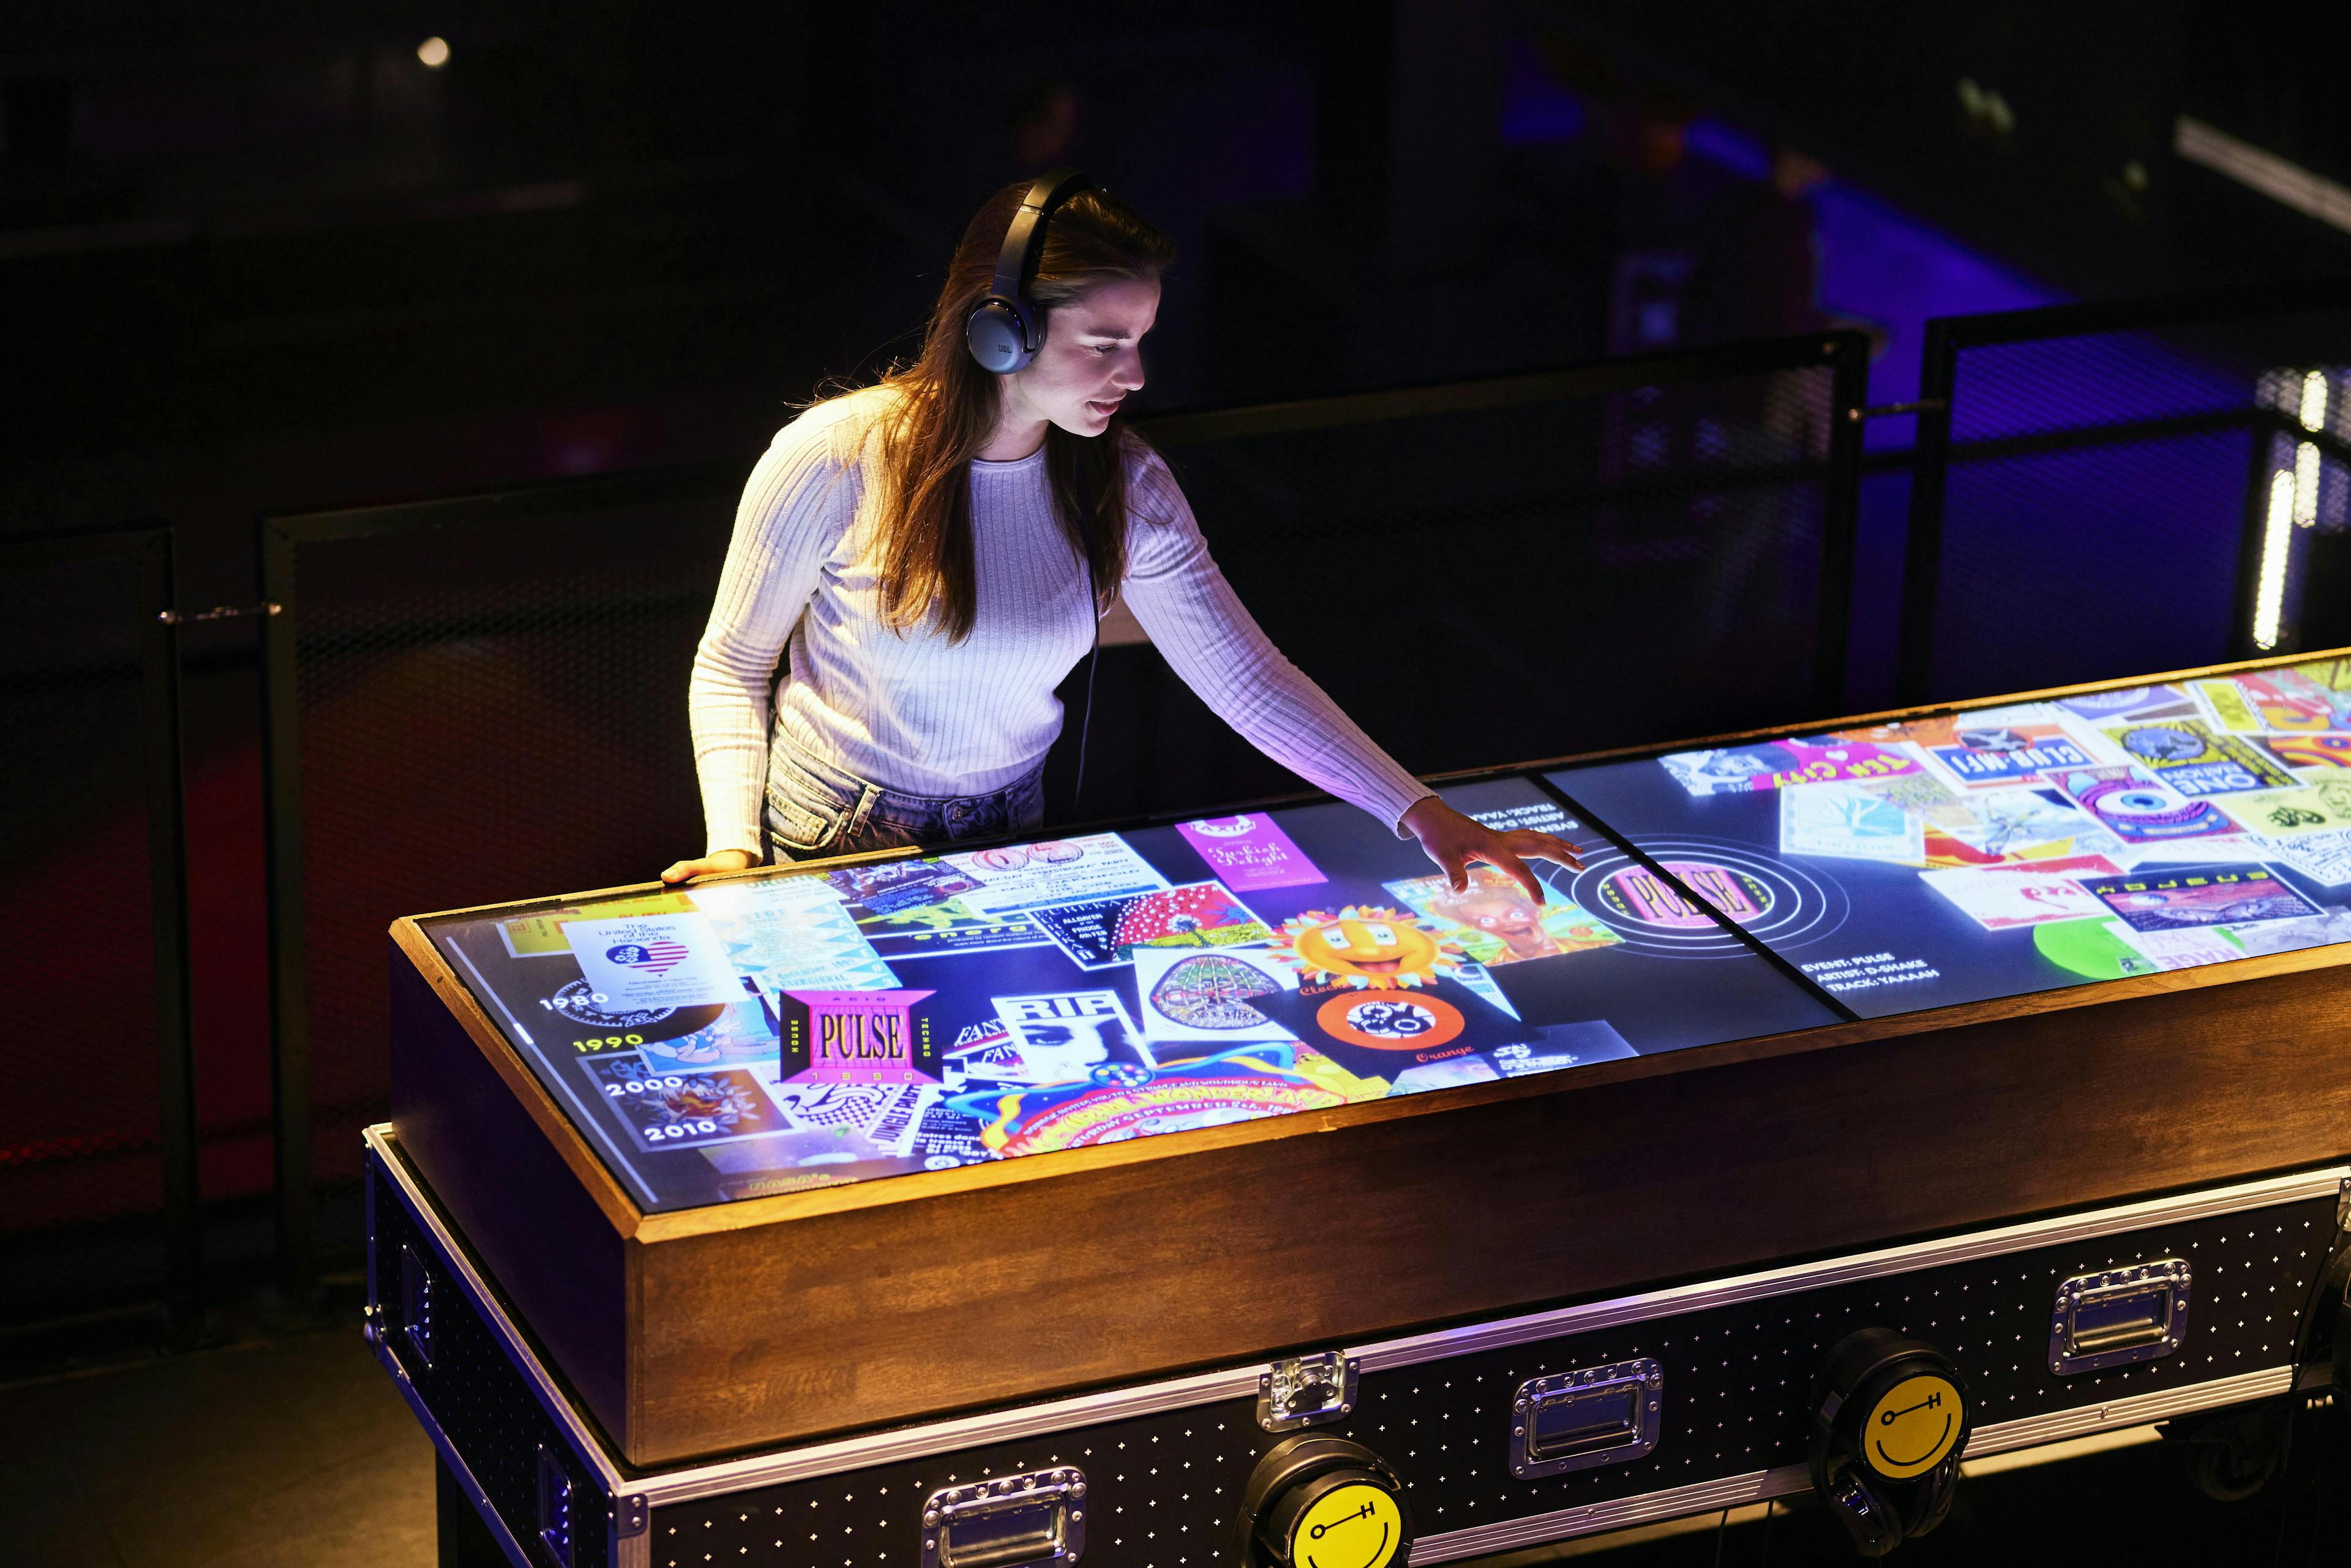 Interactive installations about electronic music history